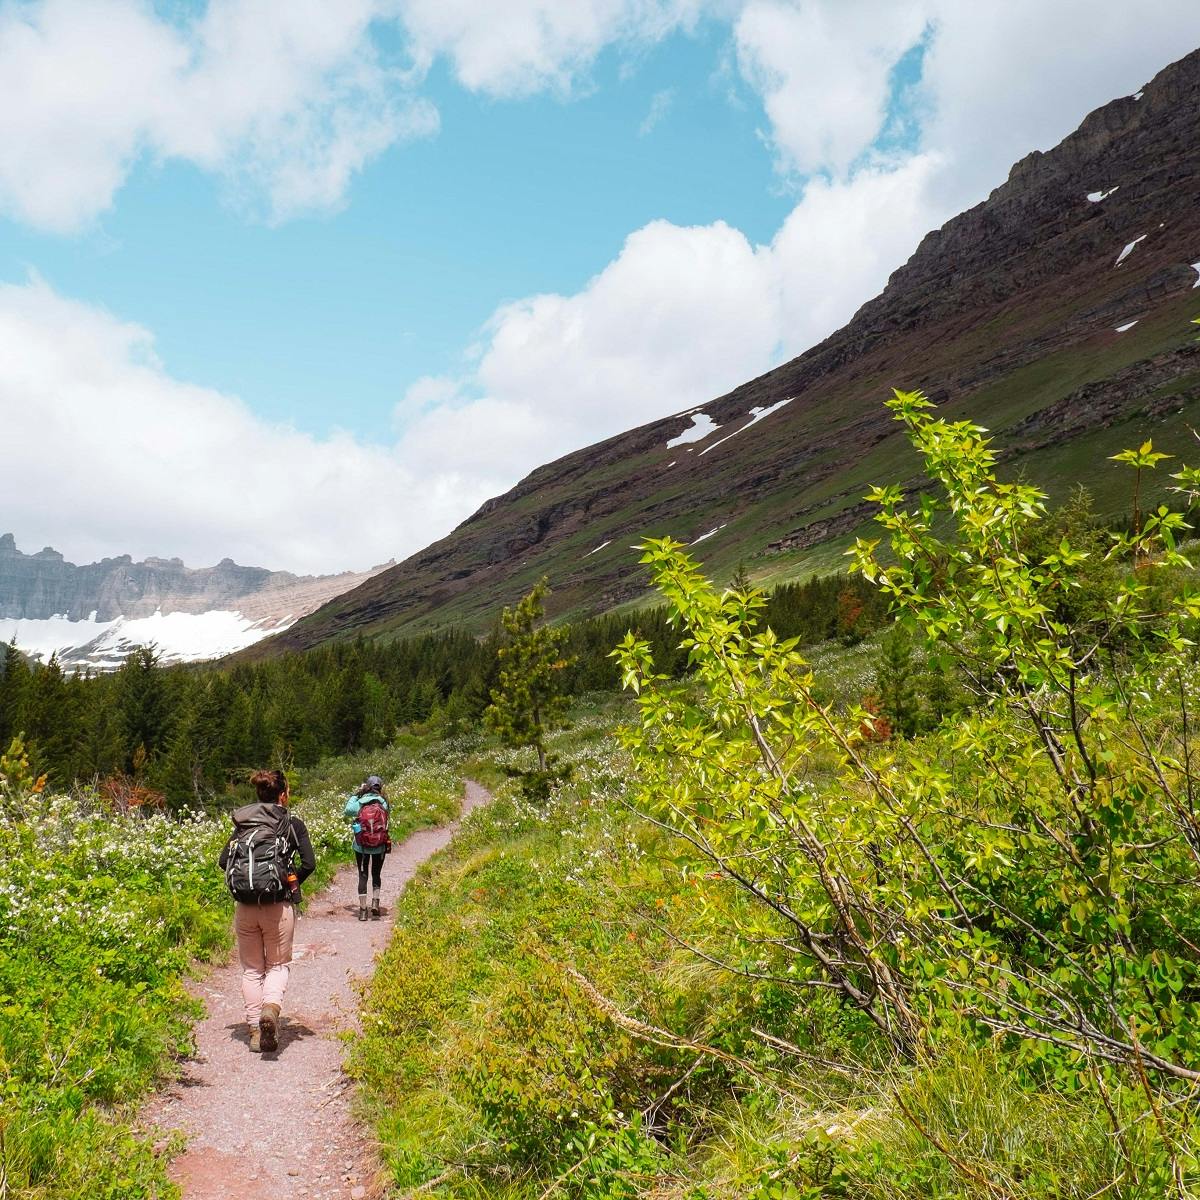 Hikers walk down a trail of wildflowers and conifer trees towards a snow covered mountain. Rewilding promotes nature based tourism.